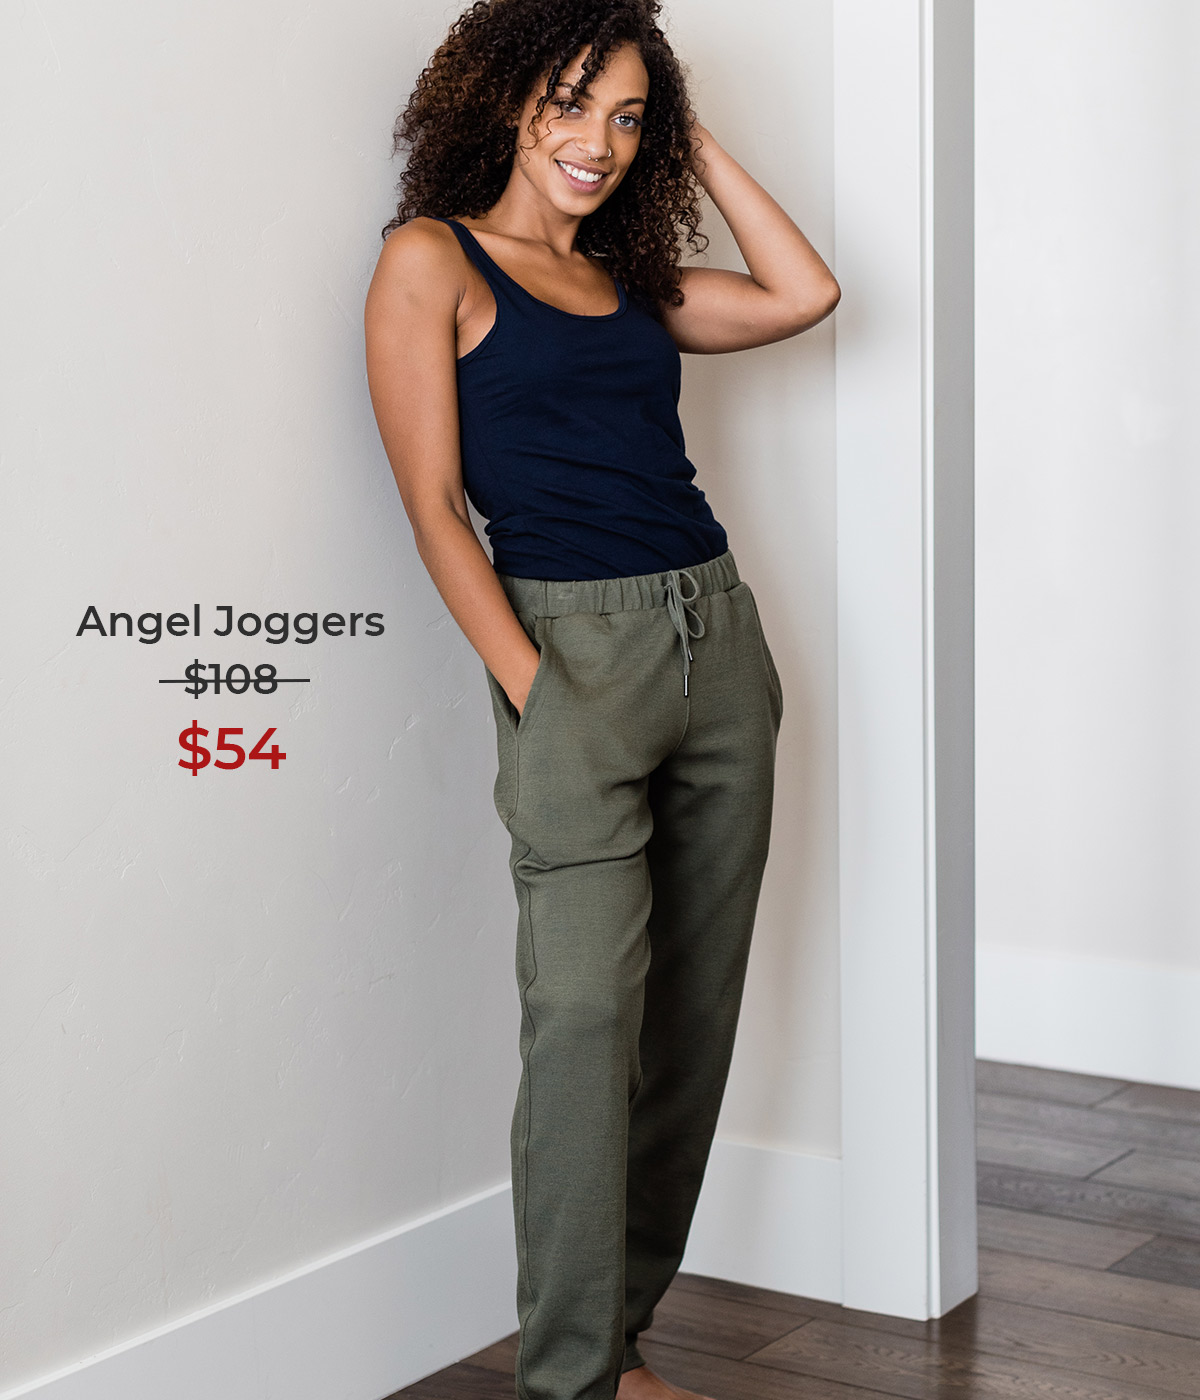 Angel Joggers now just $54